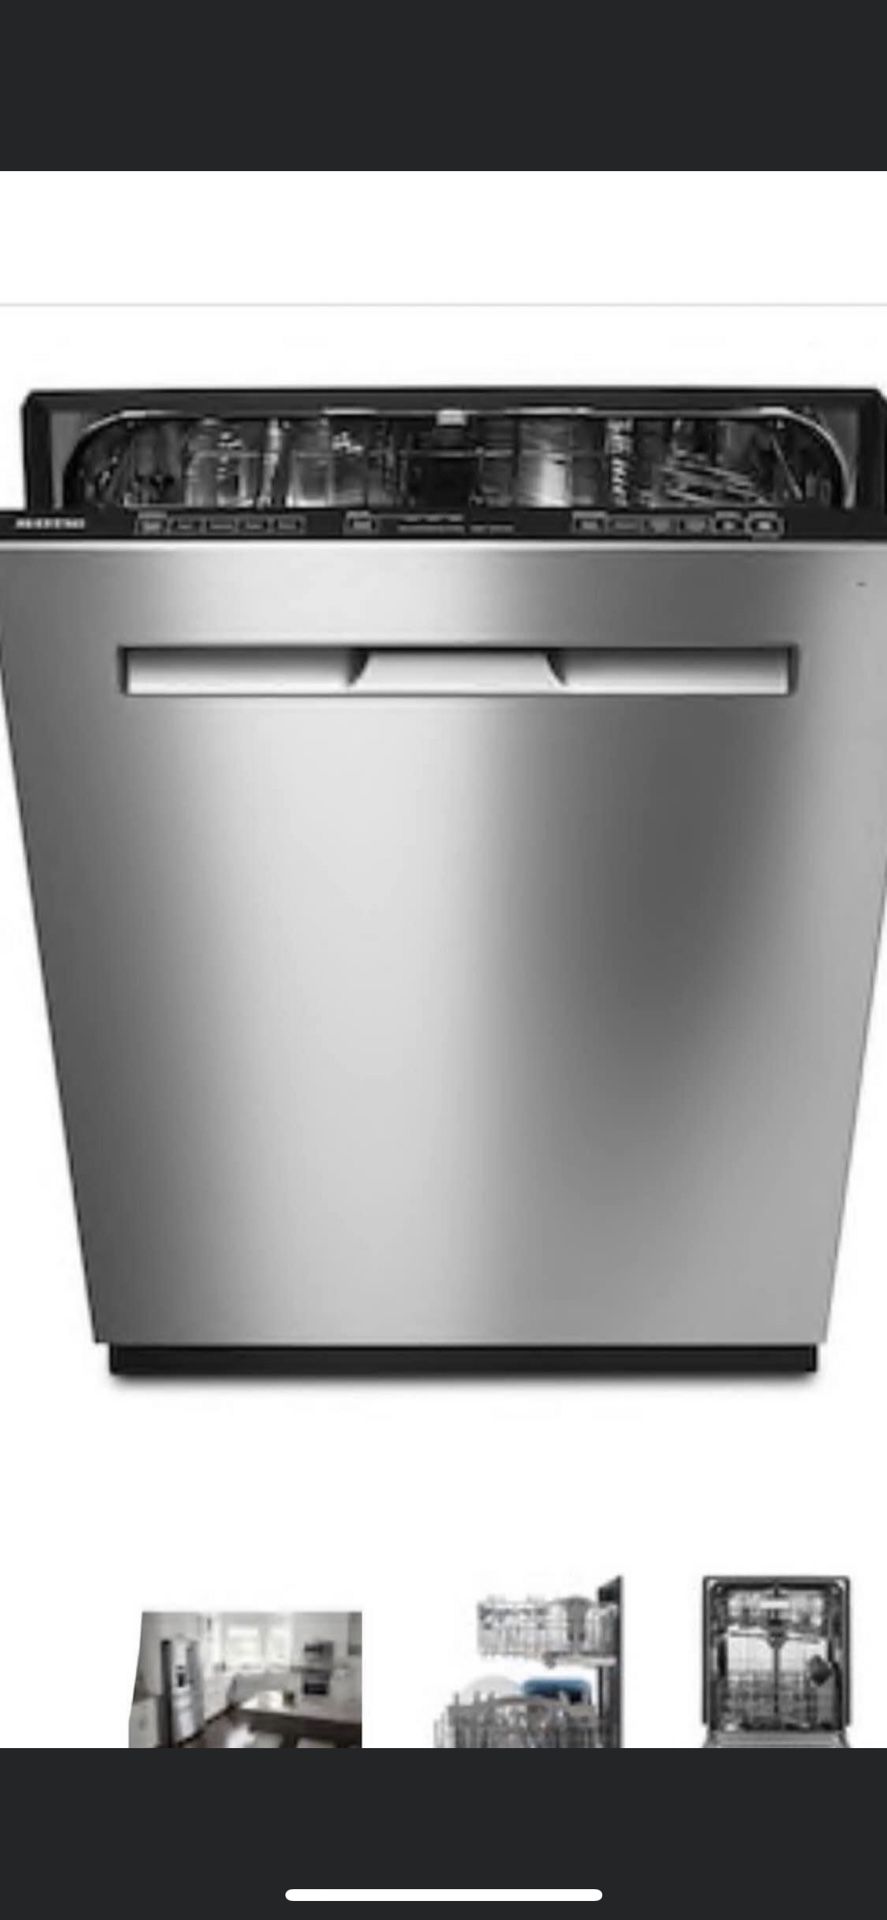 Maytag Star Qualified Built-In Dishwasher Brand New never been used with Receipt - for only $599 Flat Retail for $849 Plus Tax & for today / tomorr